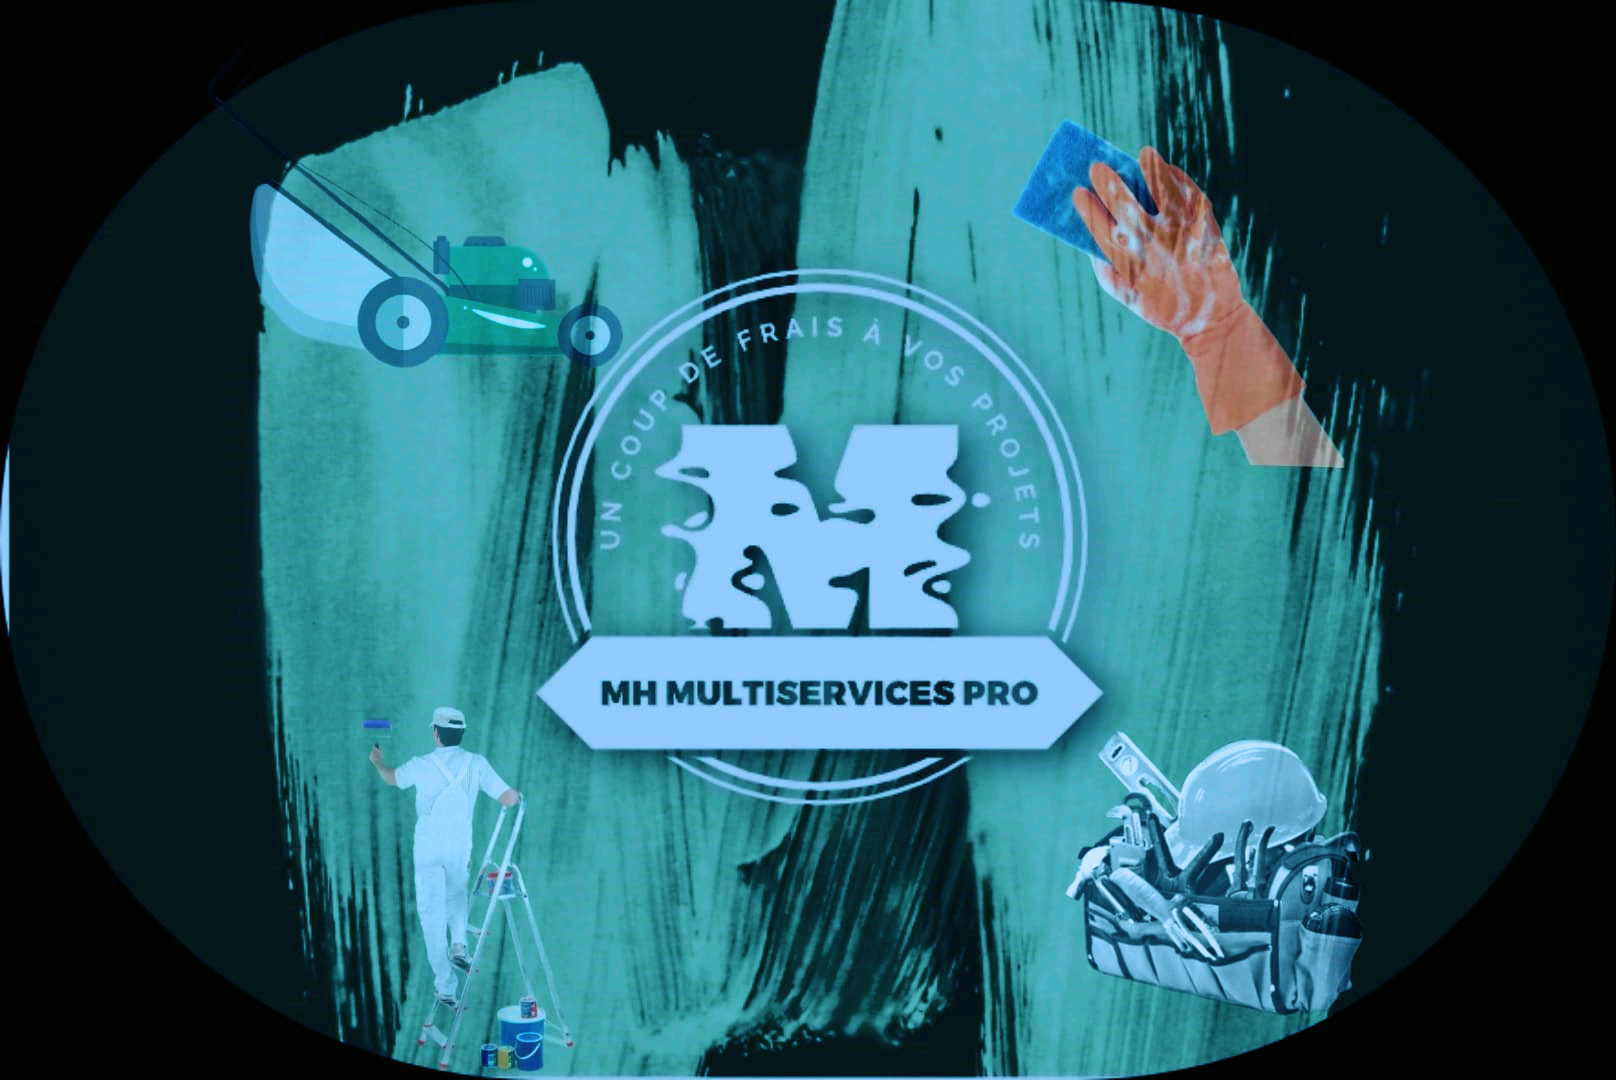 MH Multiservices pro